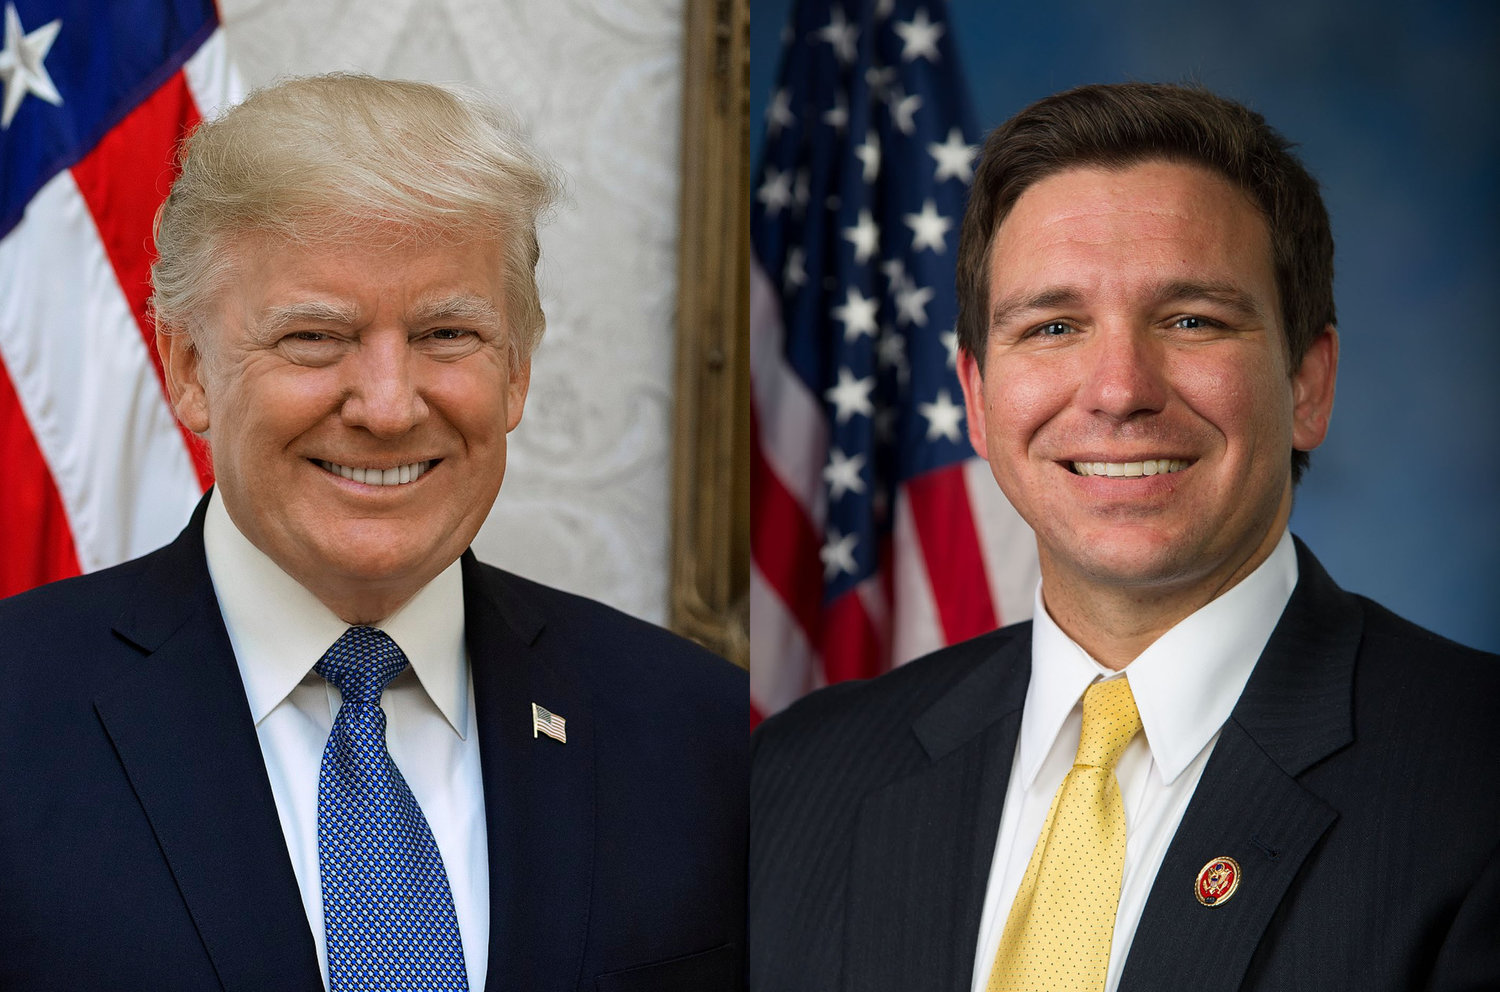 Trump: DeSantis a 'Wounded, Falling Baby Bird'